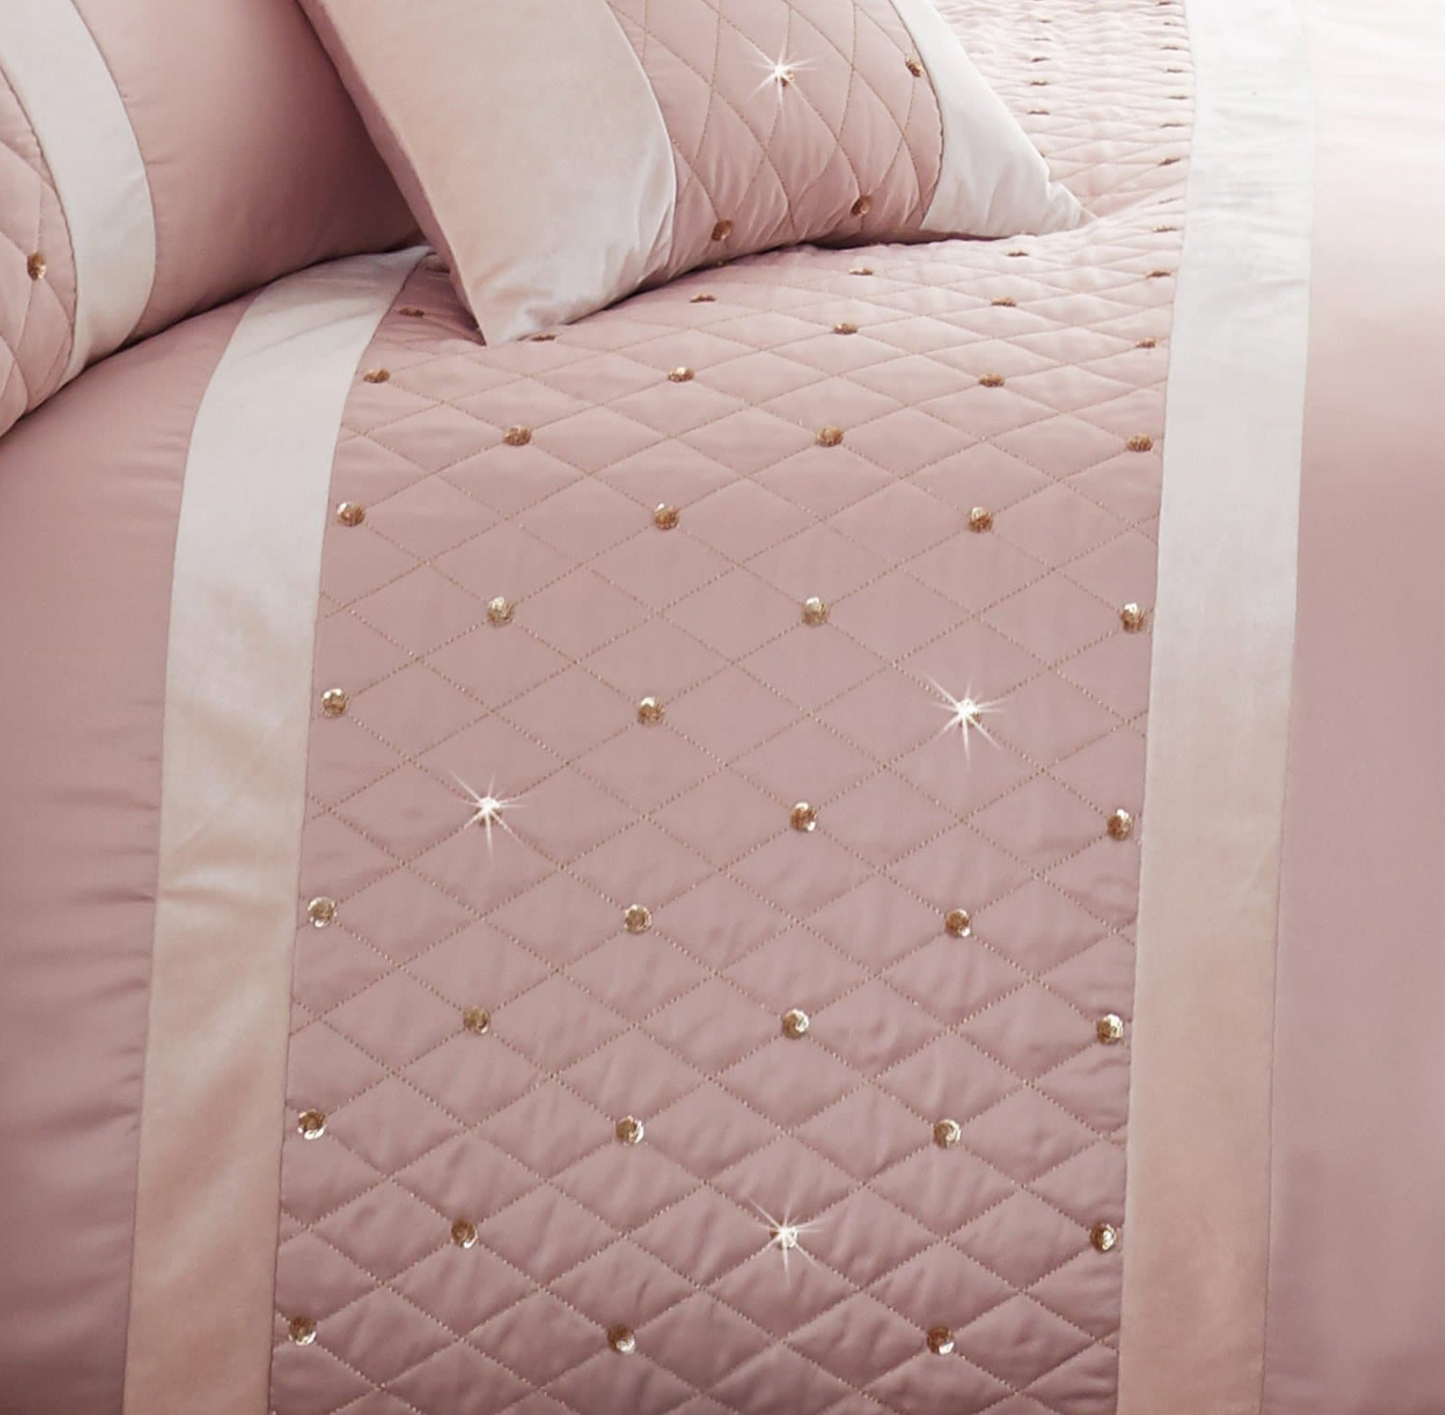 Quilted border with sequin embellishment creates an elegant look